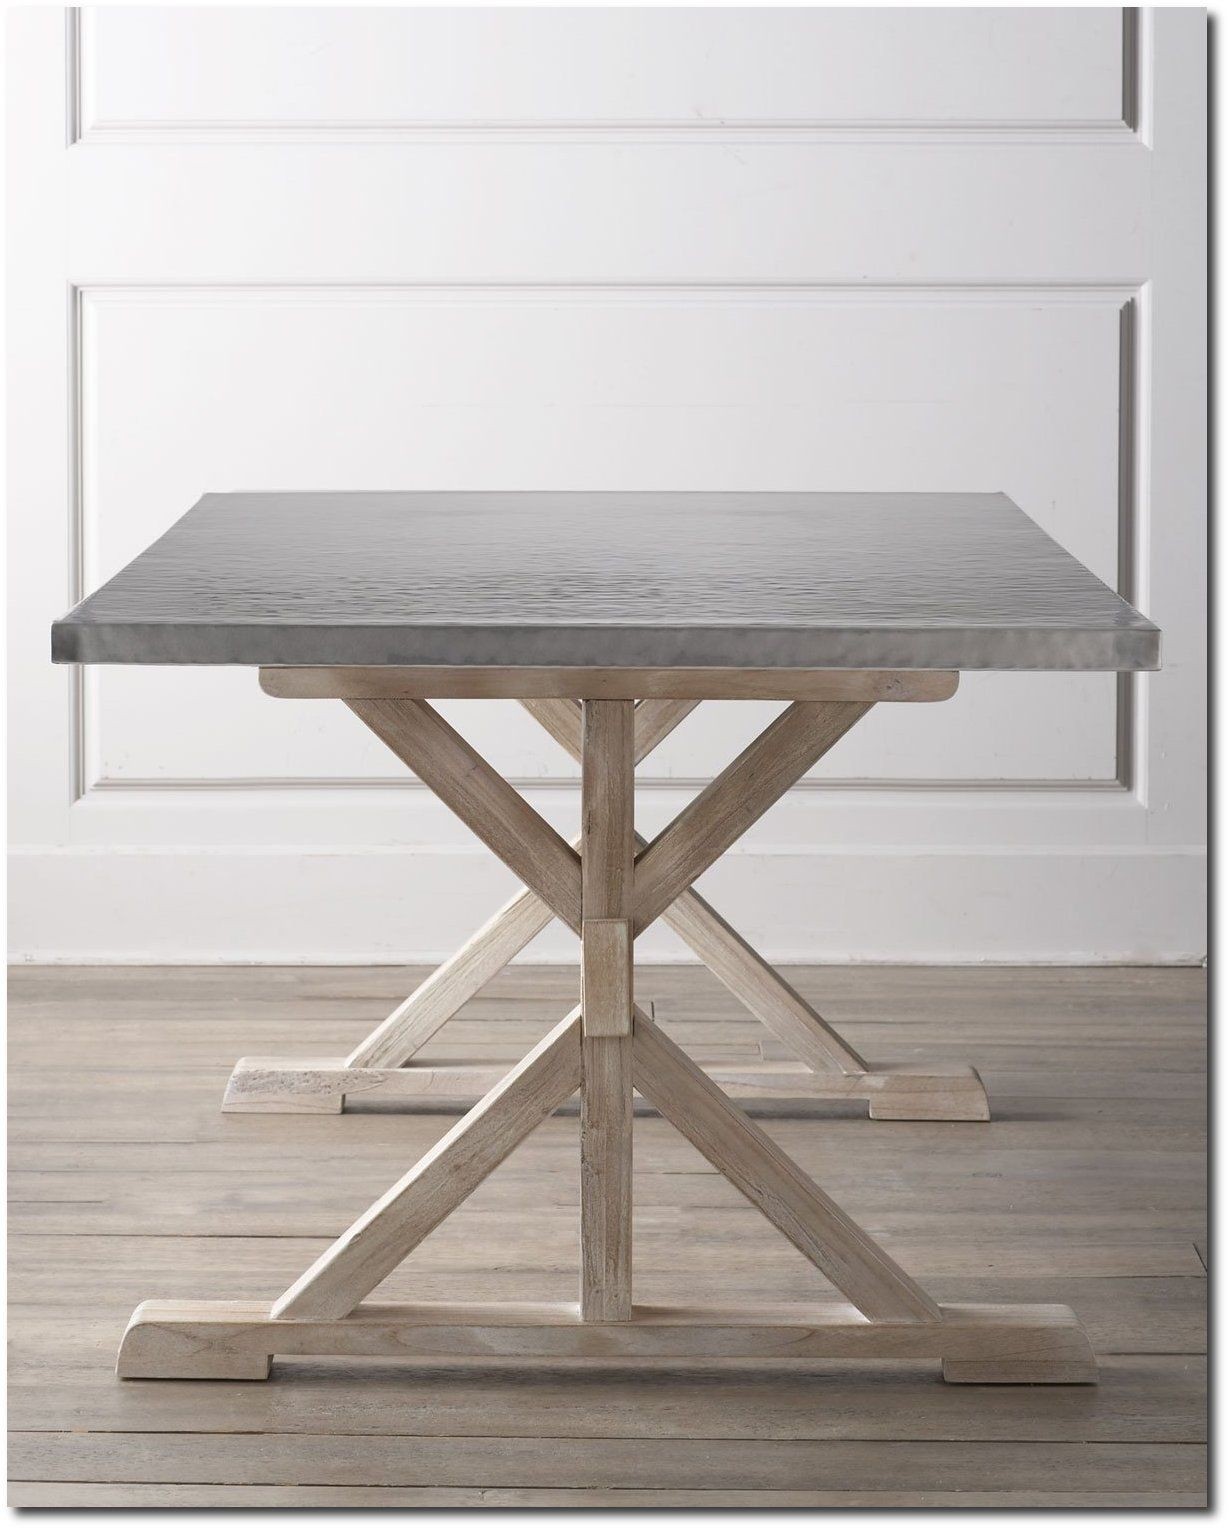 Stainless steel top dining table